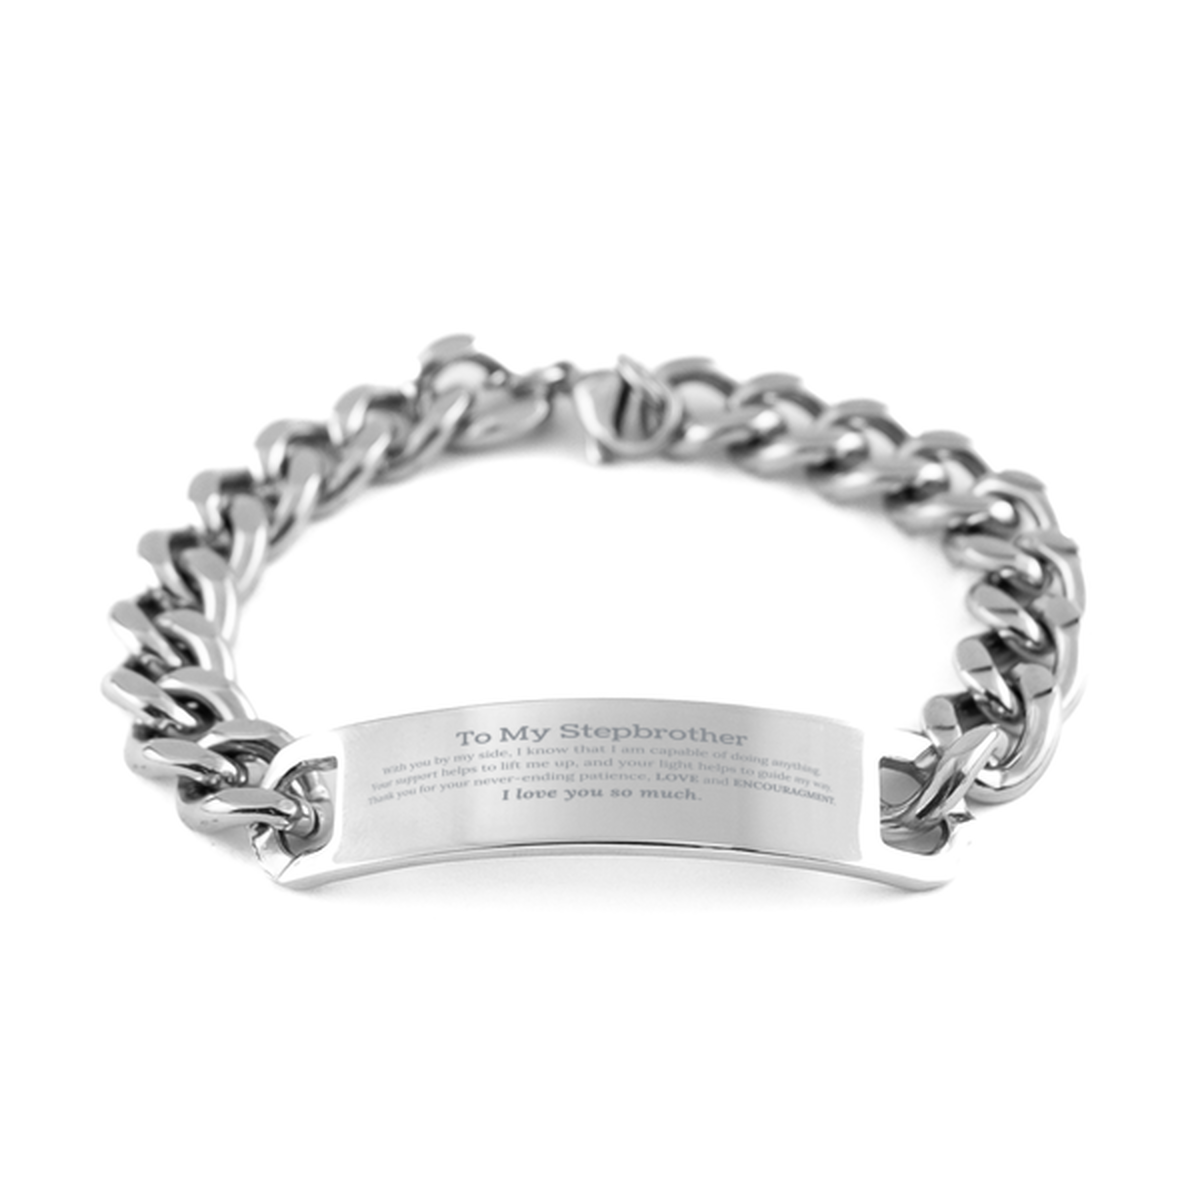 Appreciation Stepbrother Cuban Chain Stainless Steel Bracelet Gifts, To My Stepbrother Birthday Christmas Wedding Keepsake Gifts for Stepbrother With you by my side, I know that I am capable of doing anything. I love you so much